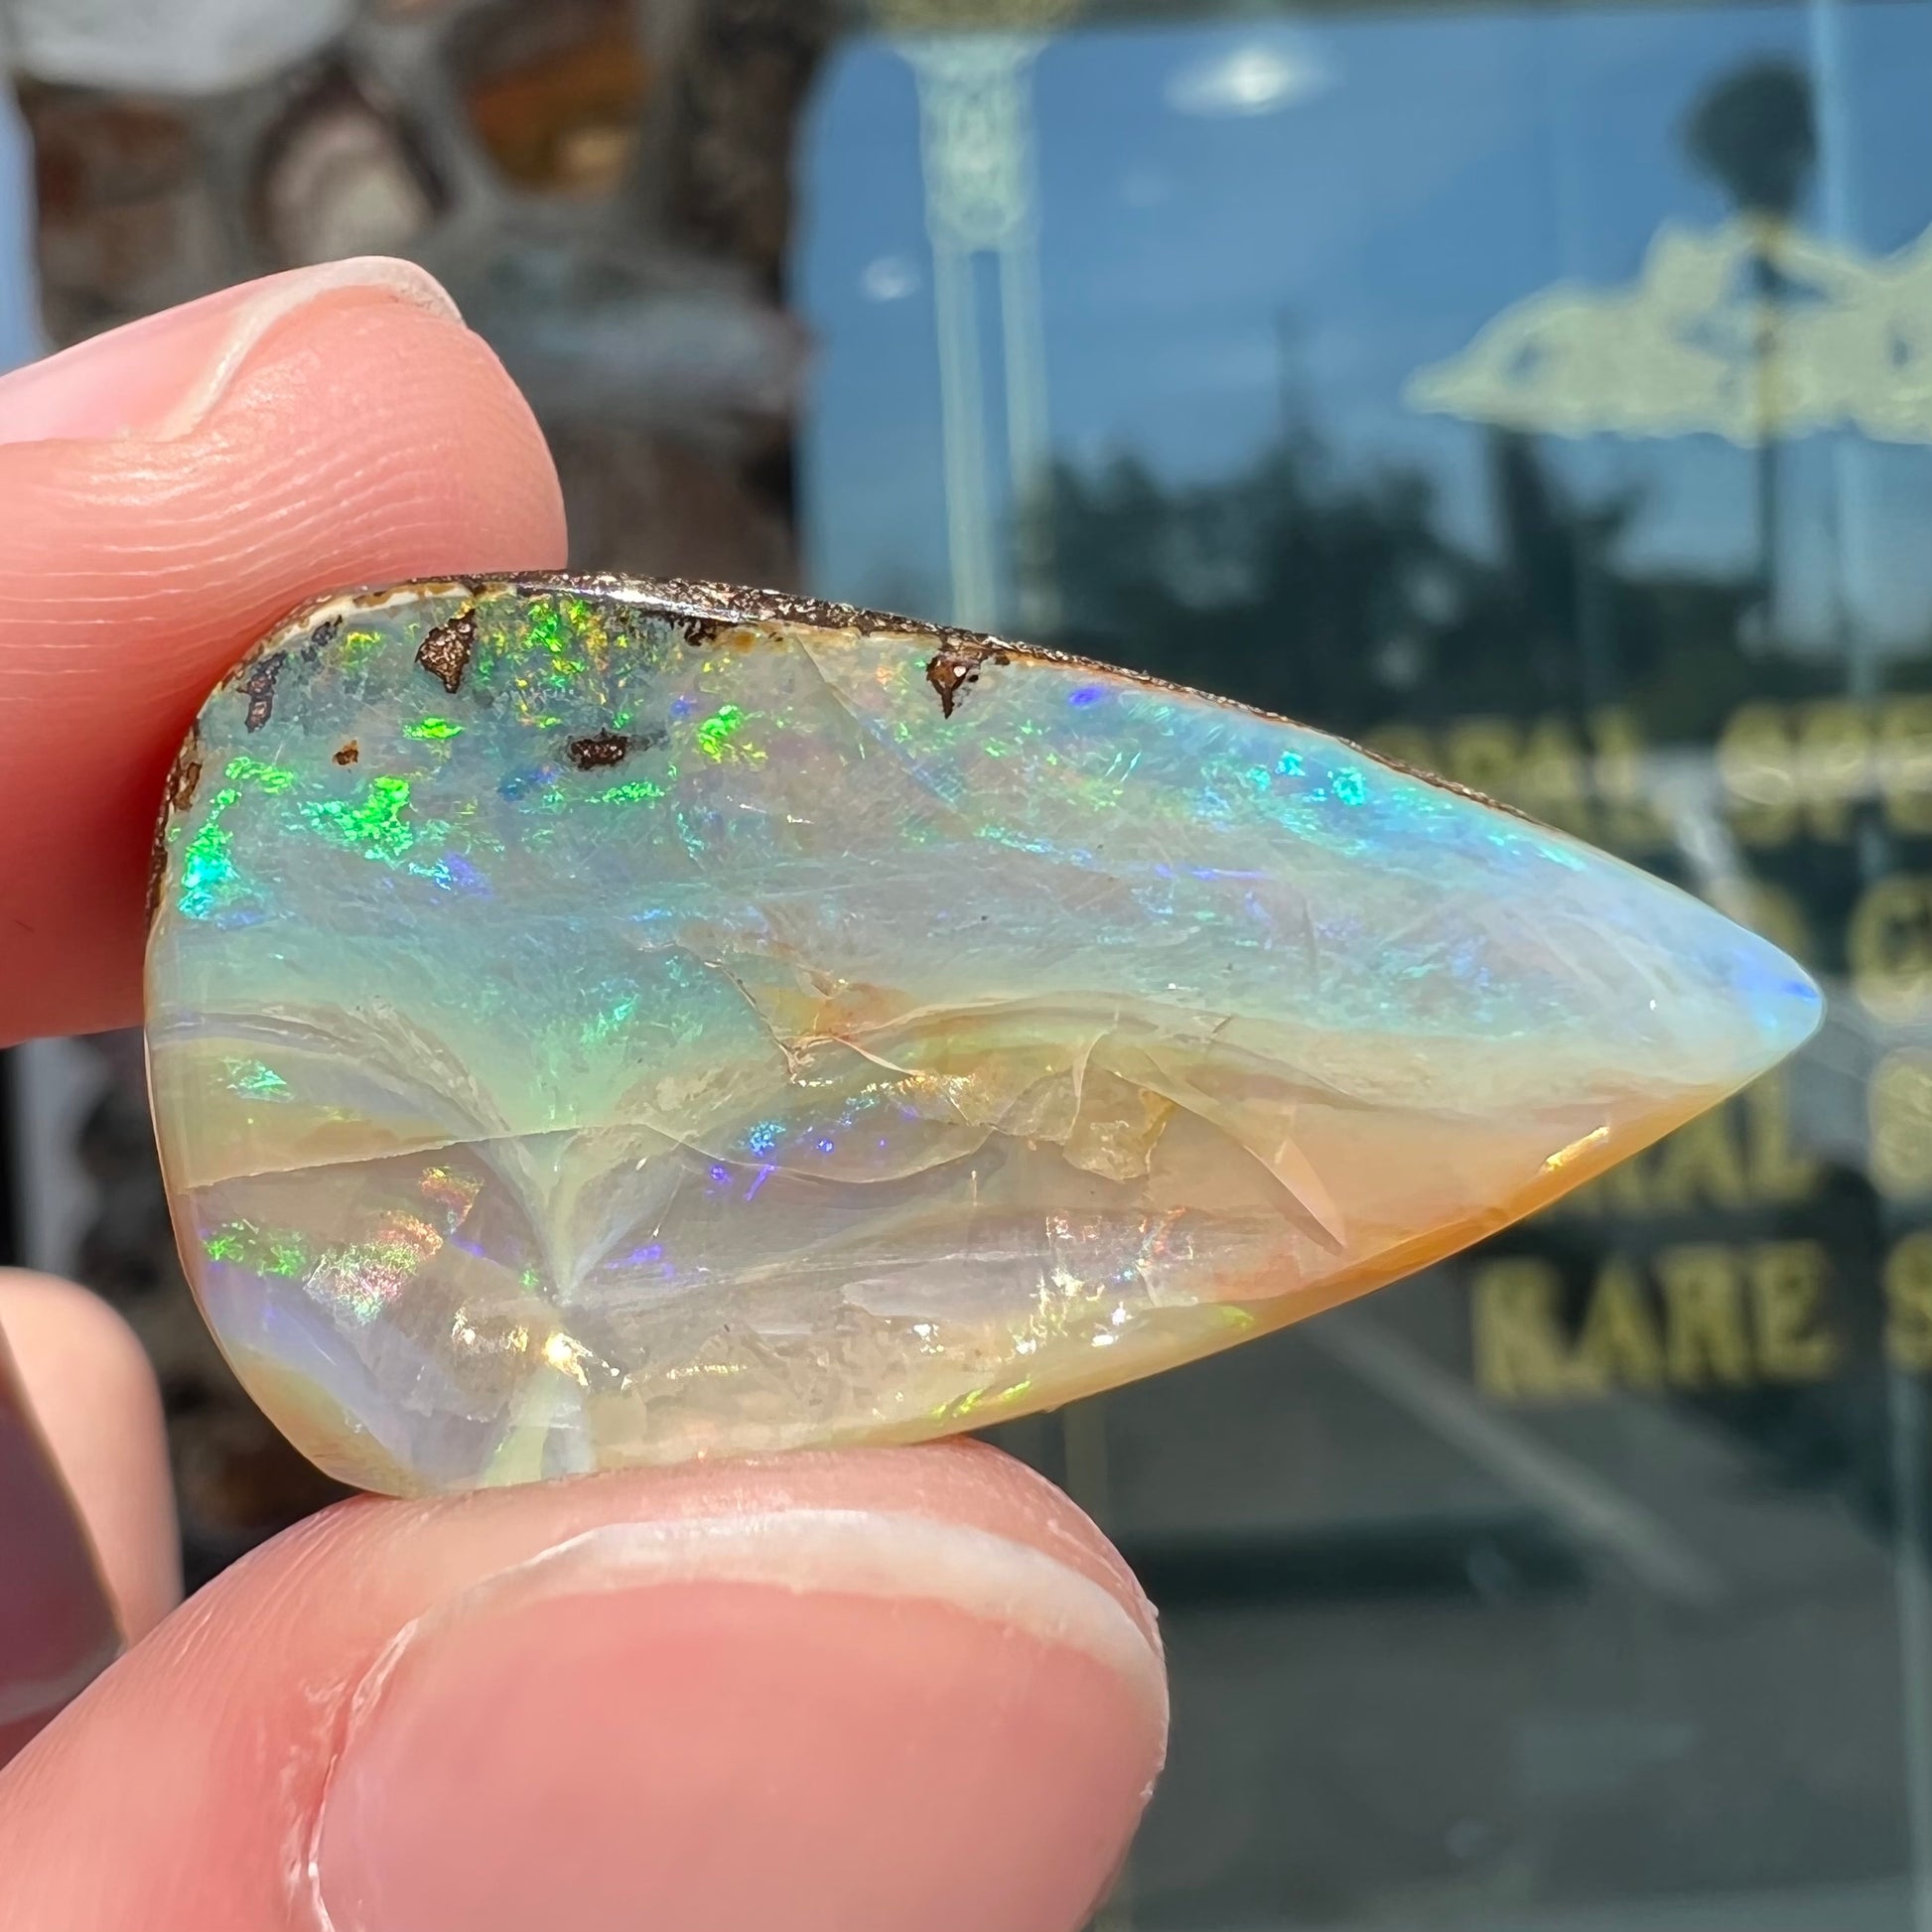 32.21ct Loose Quilpie Boulder Opal Stone